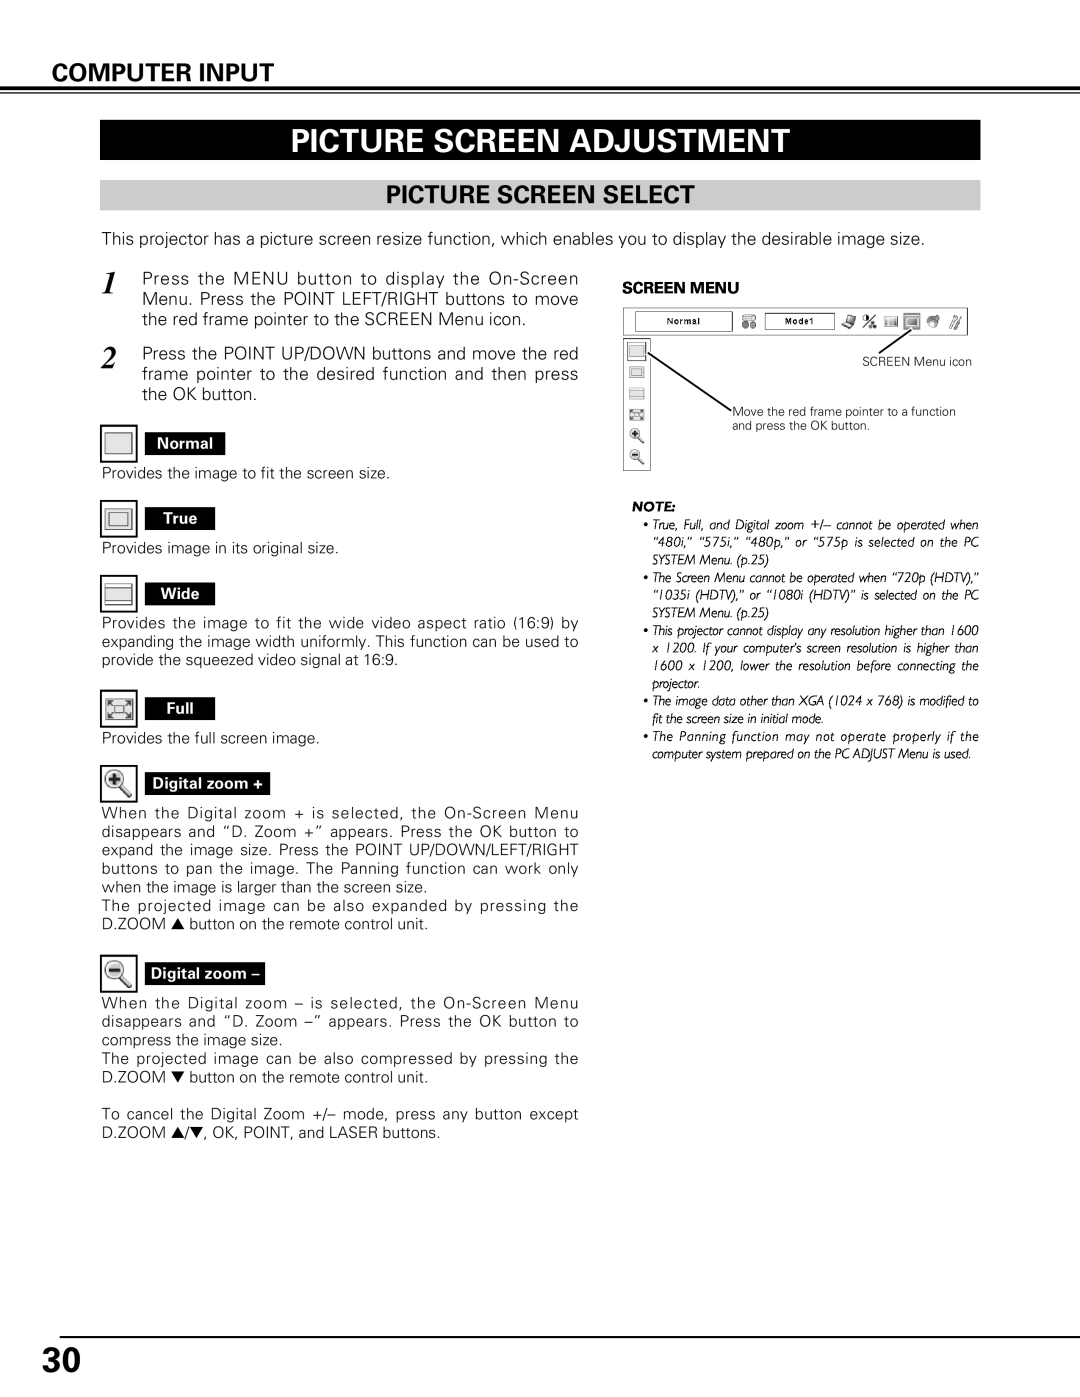 Canon LV-7575 user manual Picture Screen Adjustment, Picture Screen Select, Computer Input, Screen Menu 